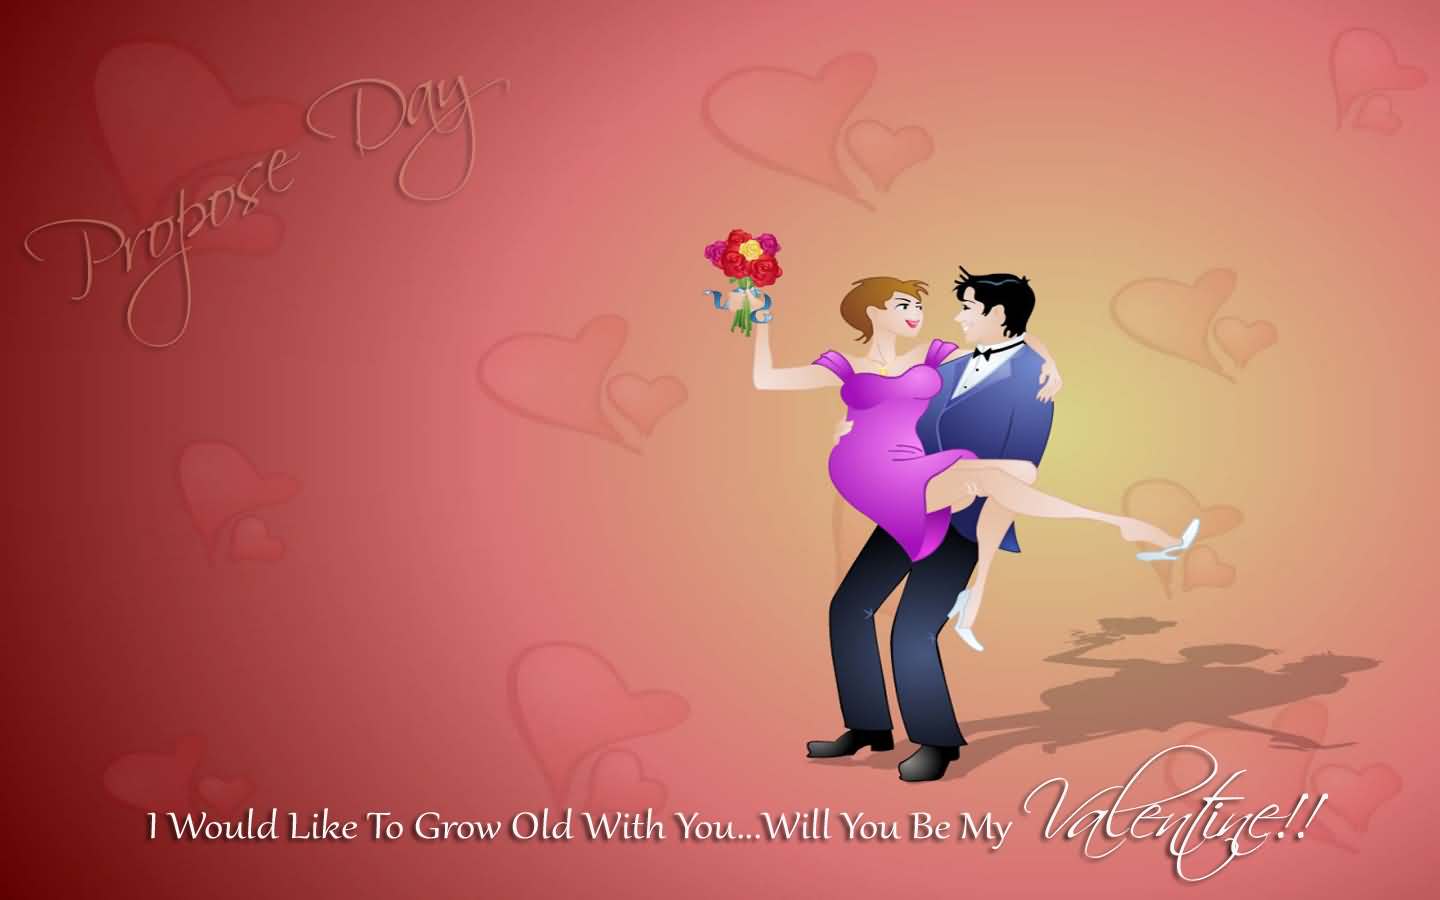 Best Propose Day 2018 Greeting Picture Ideas